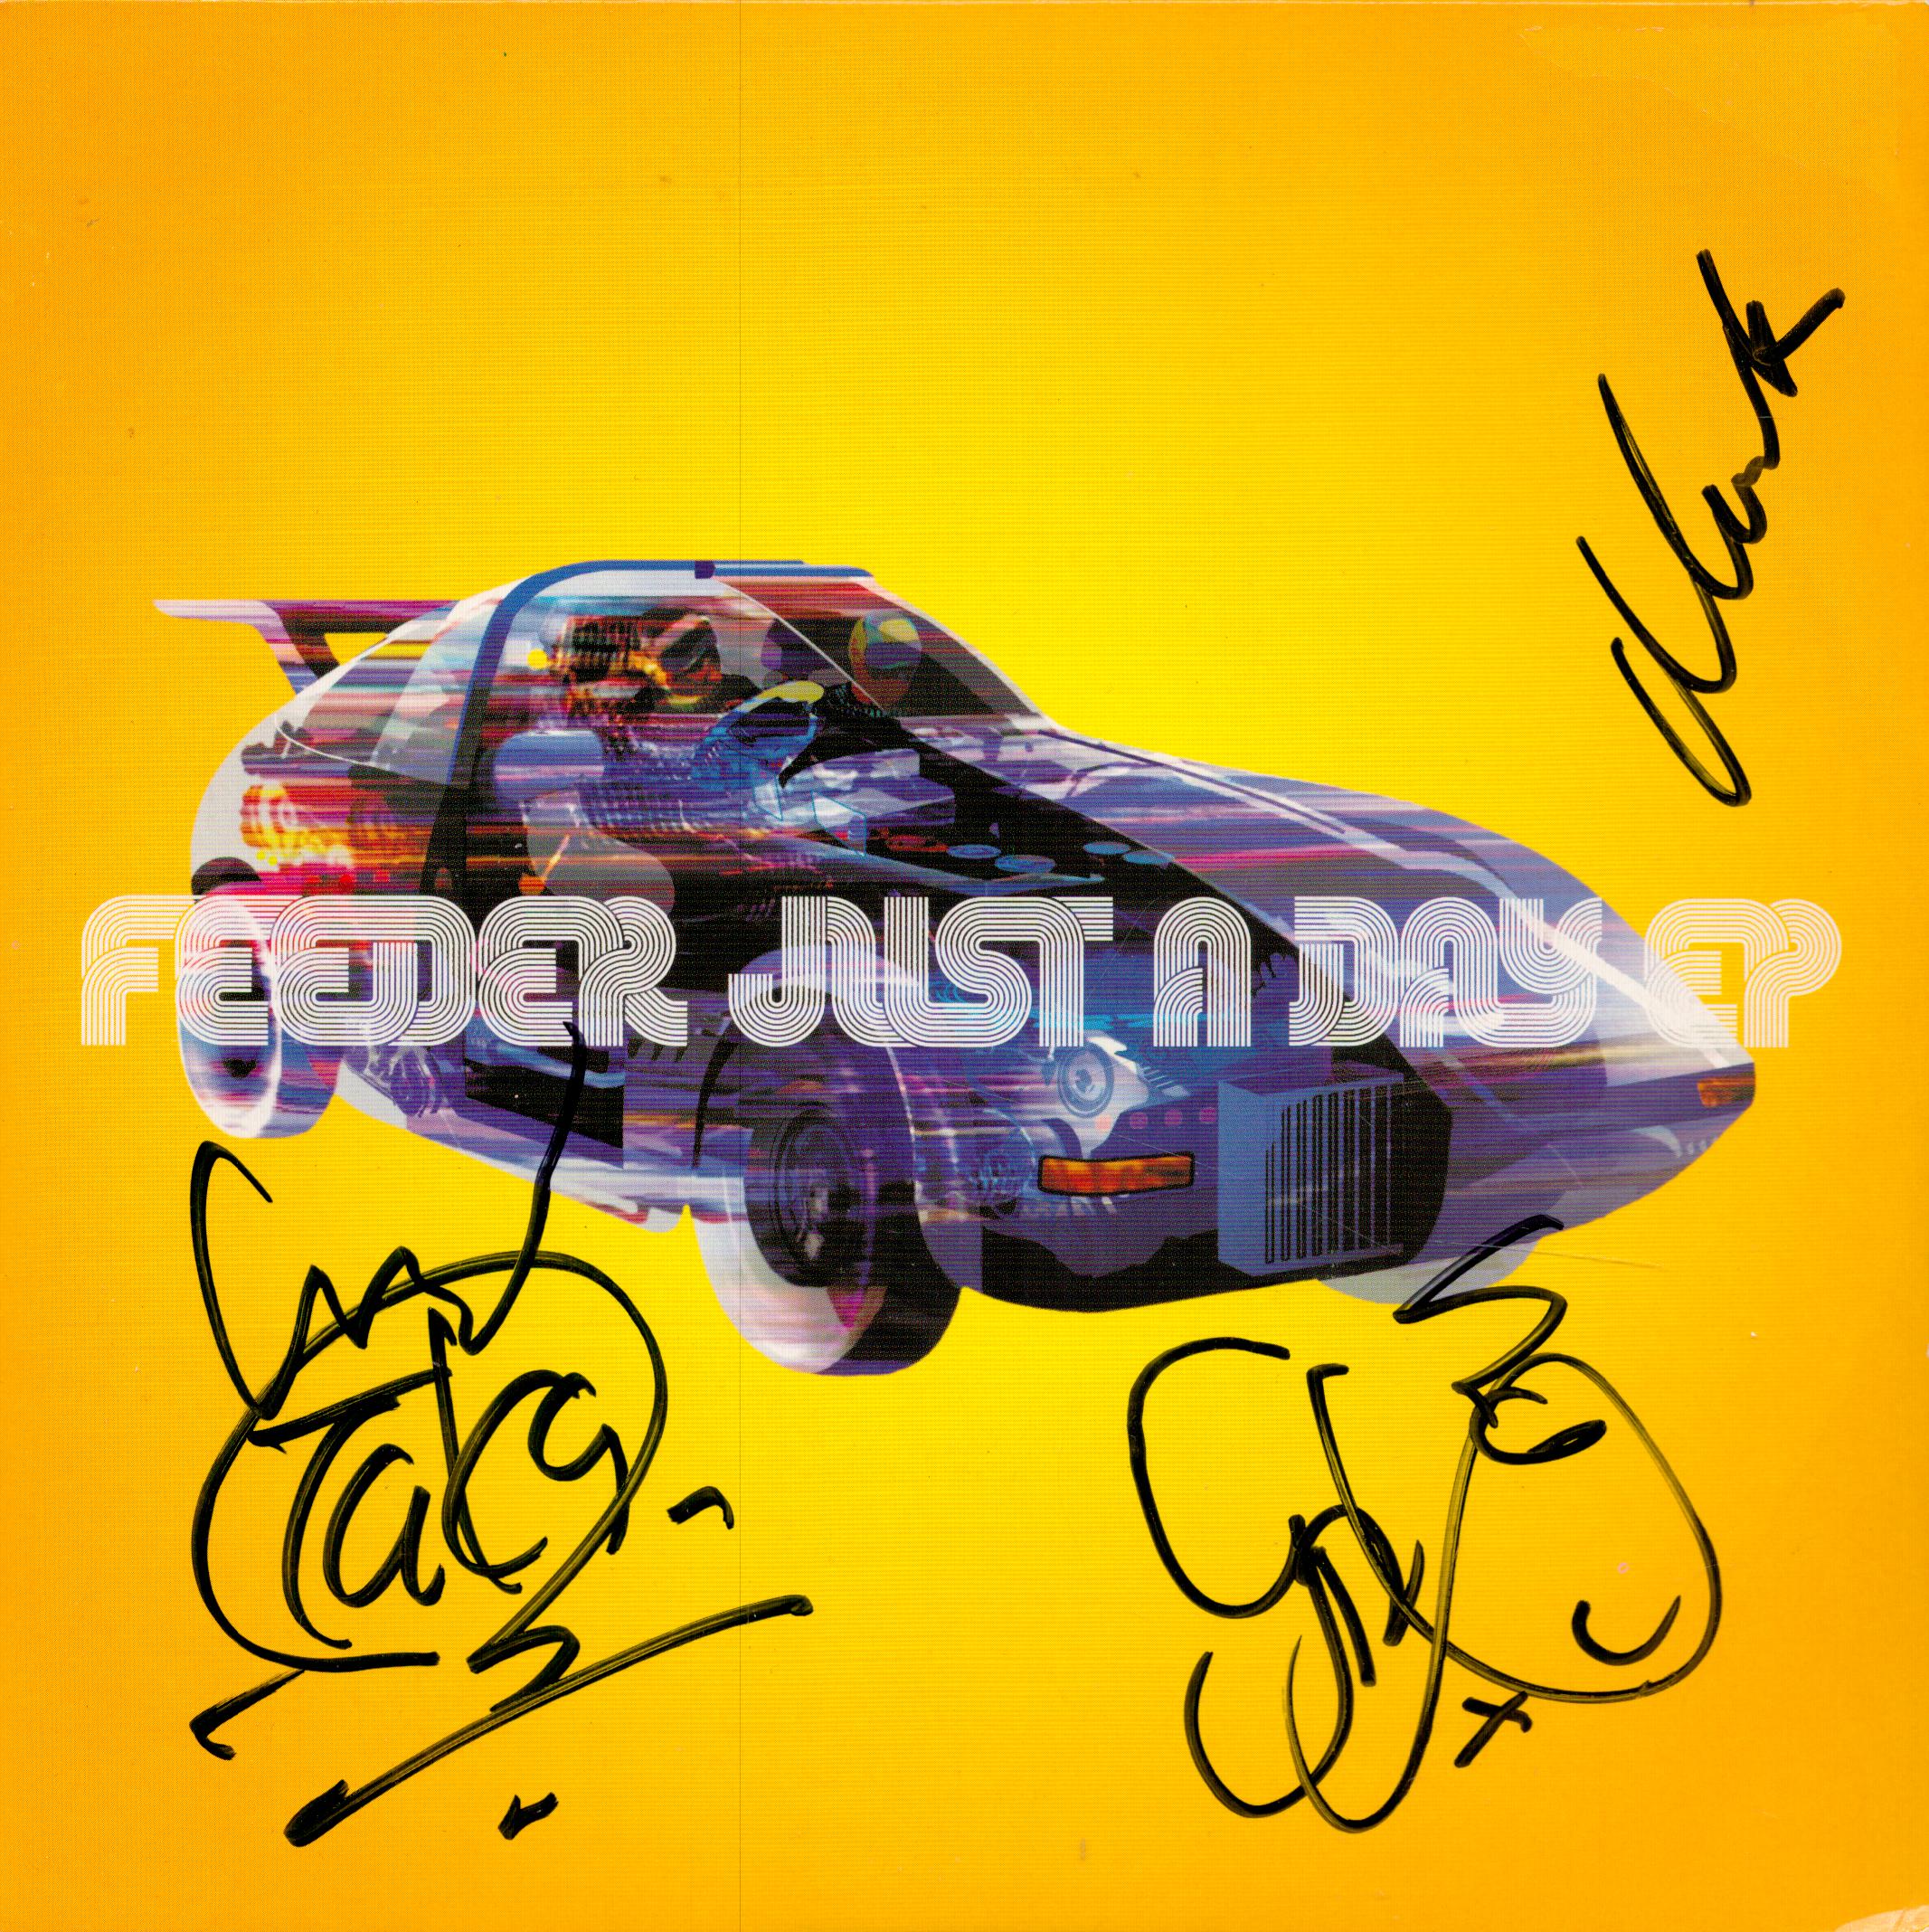 Feeder Band Multi Signed 'Just a Day' Vinyl Sleeve With Vinyl included. Signed by Grant Nicholas,